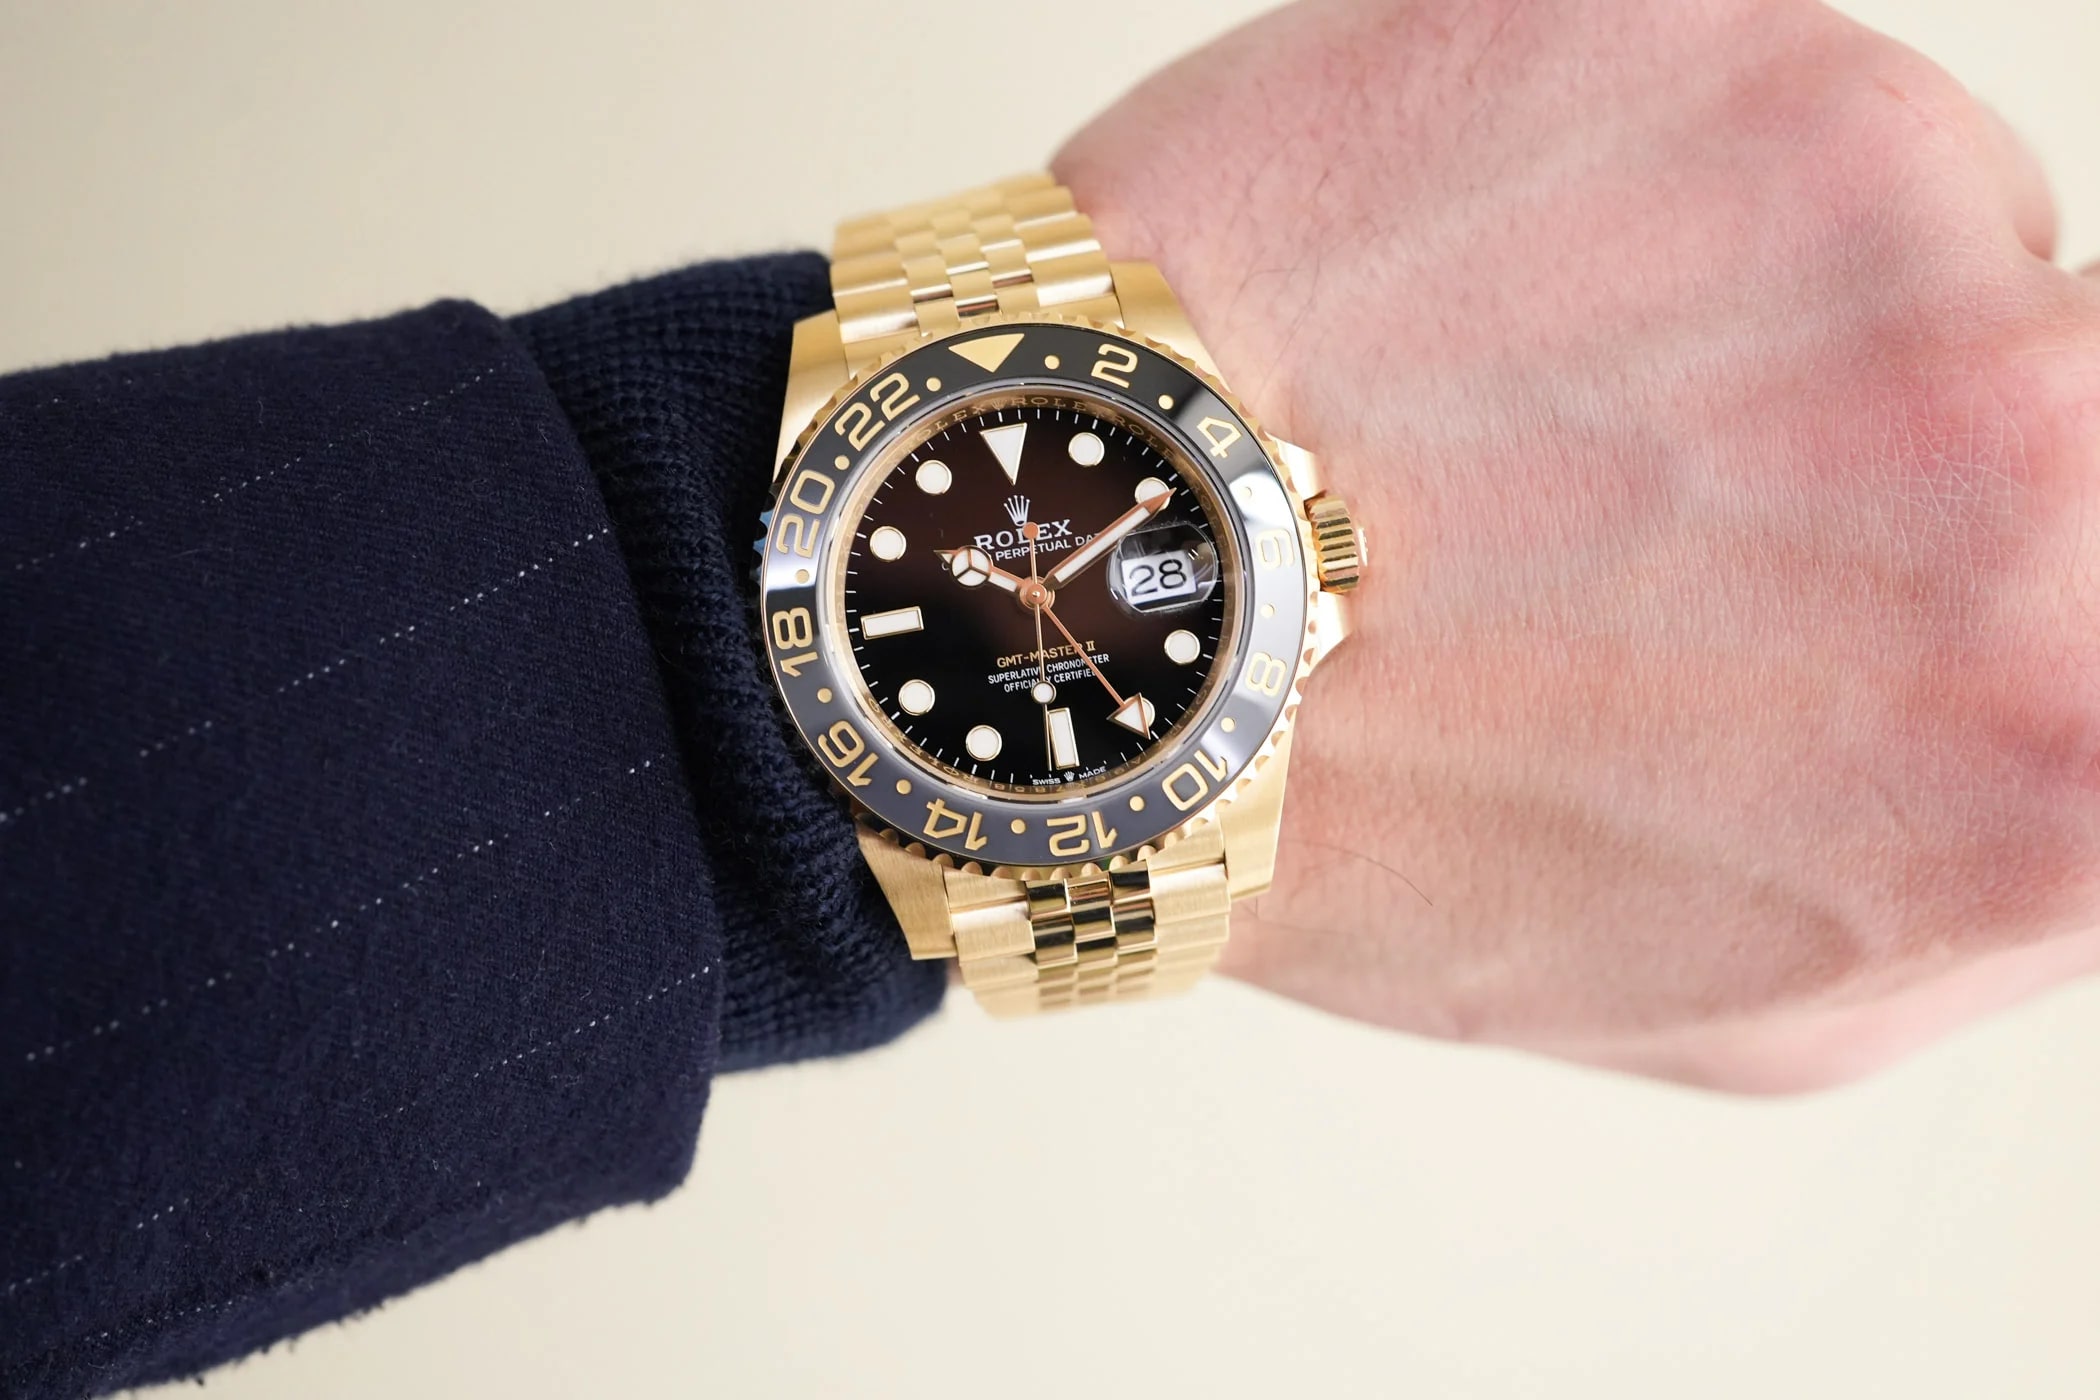 All-2023-Rolex-New-Models-Live-Photos-hands-on-New-2023-Rolex-GMT-Master-II-GRNR-Yellow-Gold-3.jpg